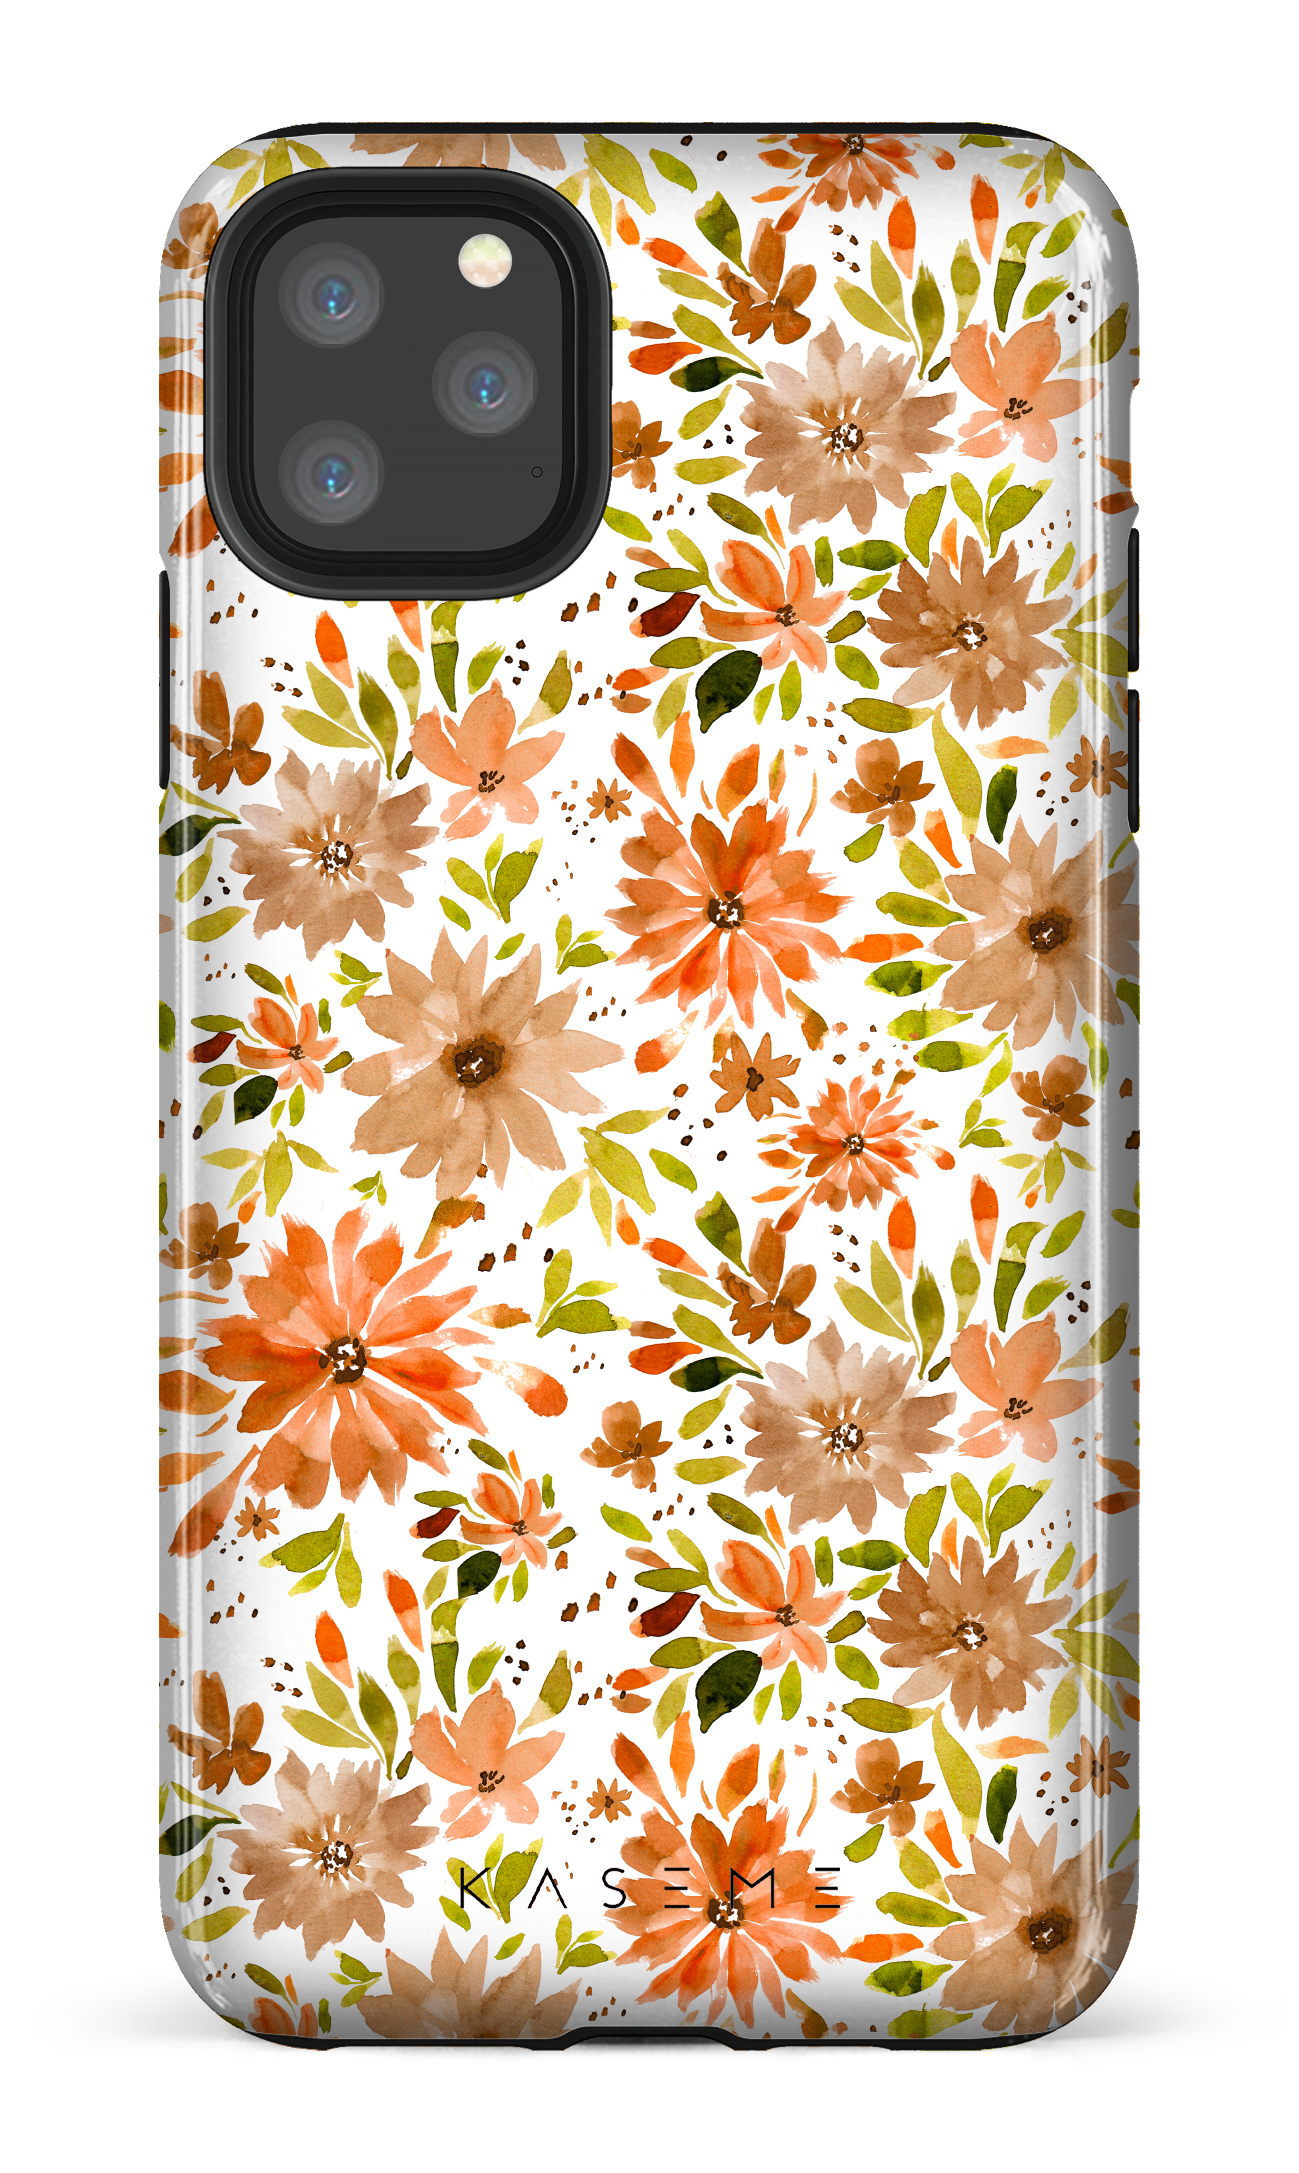 Golden Harvest blooms by ﻿ Zohra designs - iPhone 11 Pro Max